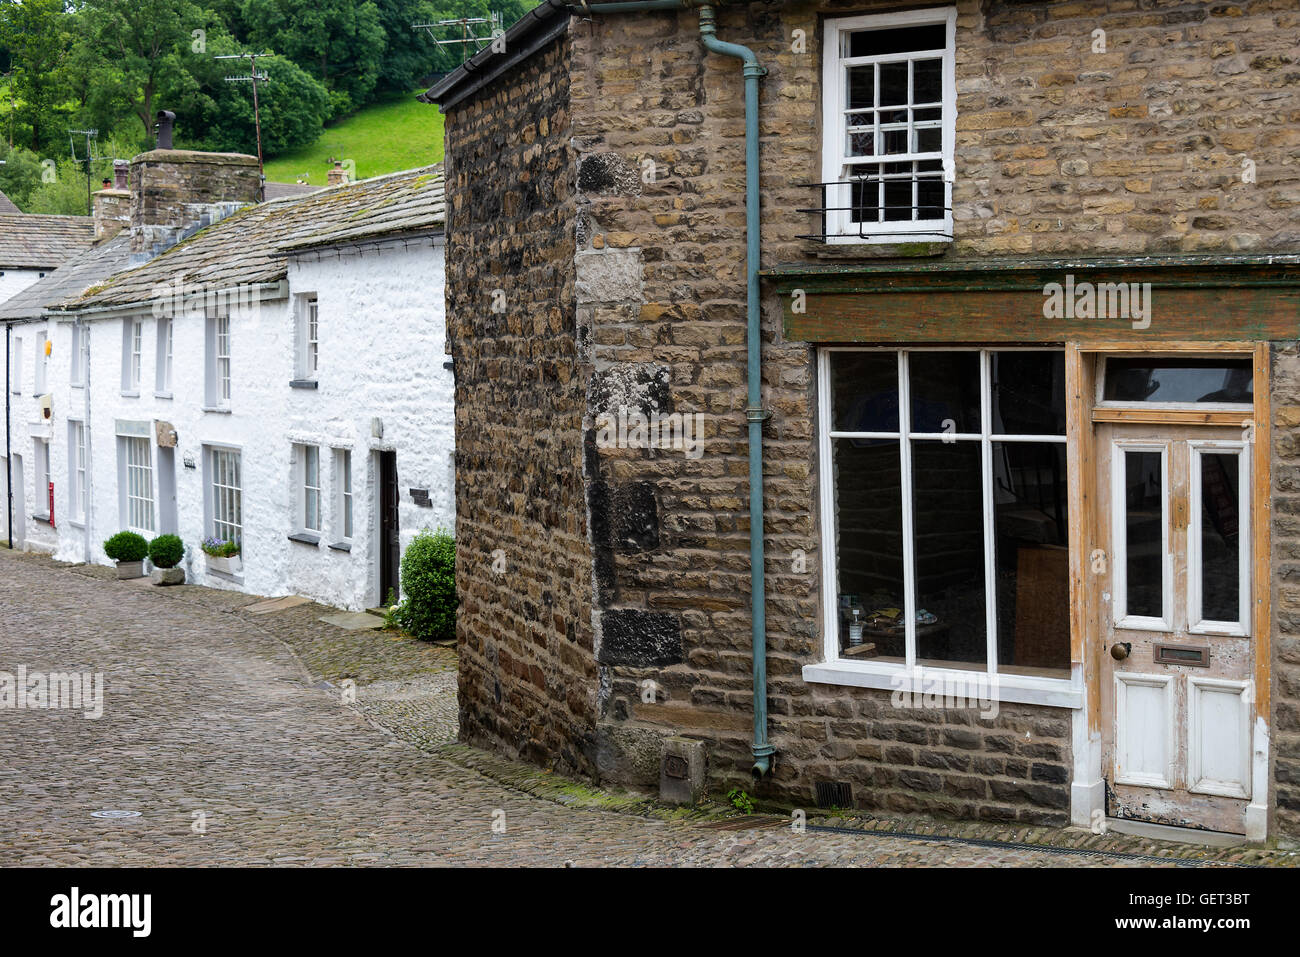 A Row of Whitewashed Cottages and an Old Shop in Dent Cumbria Yorkshire Dales National Park England United Kingdom UK Stock Photo